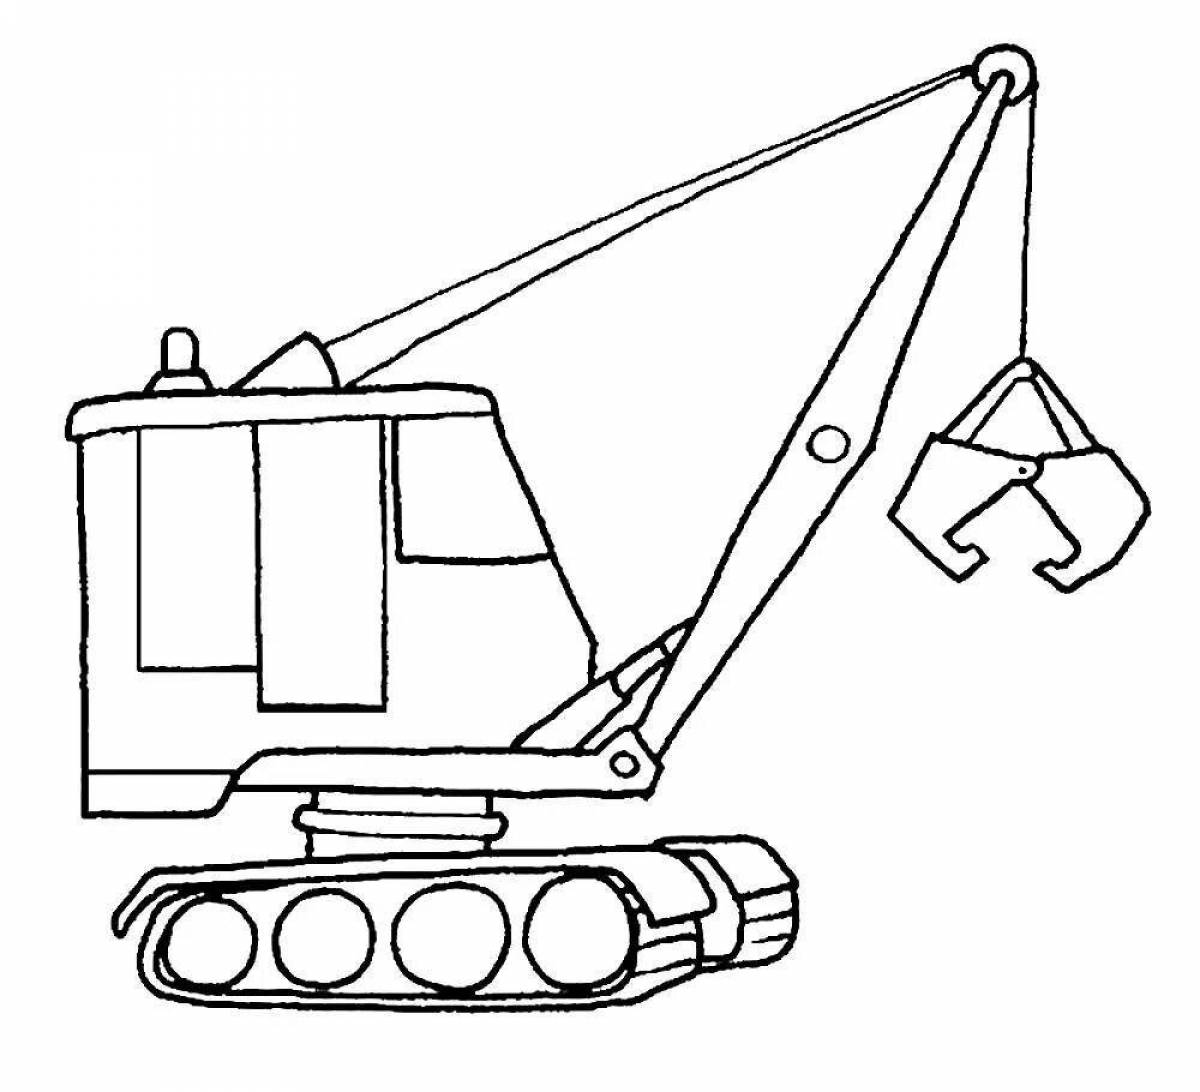 Shiny construction vehicle coloring book for boys